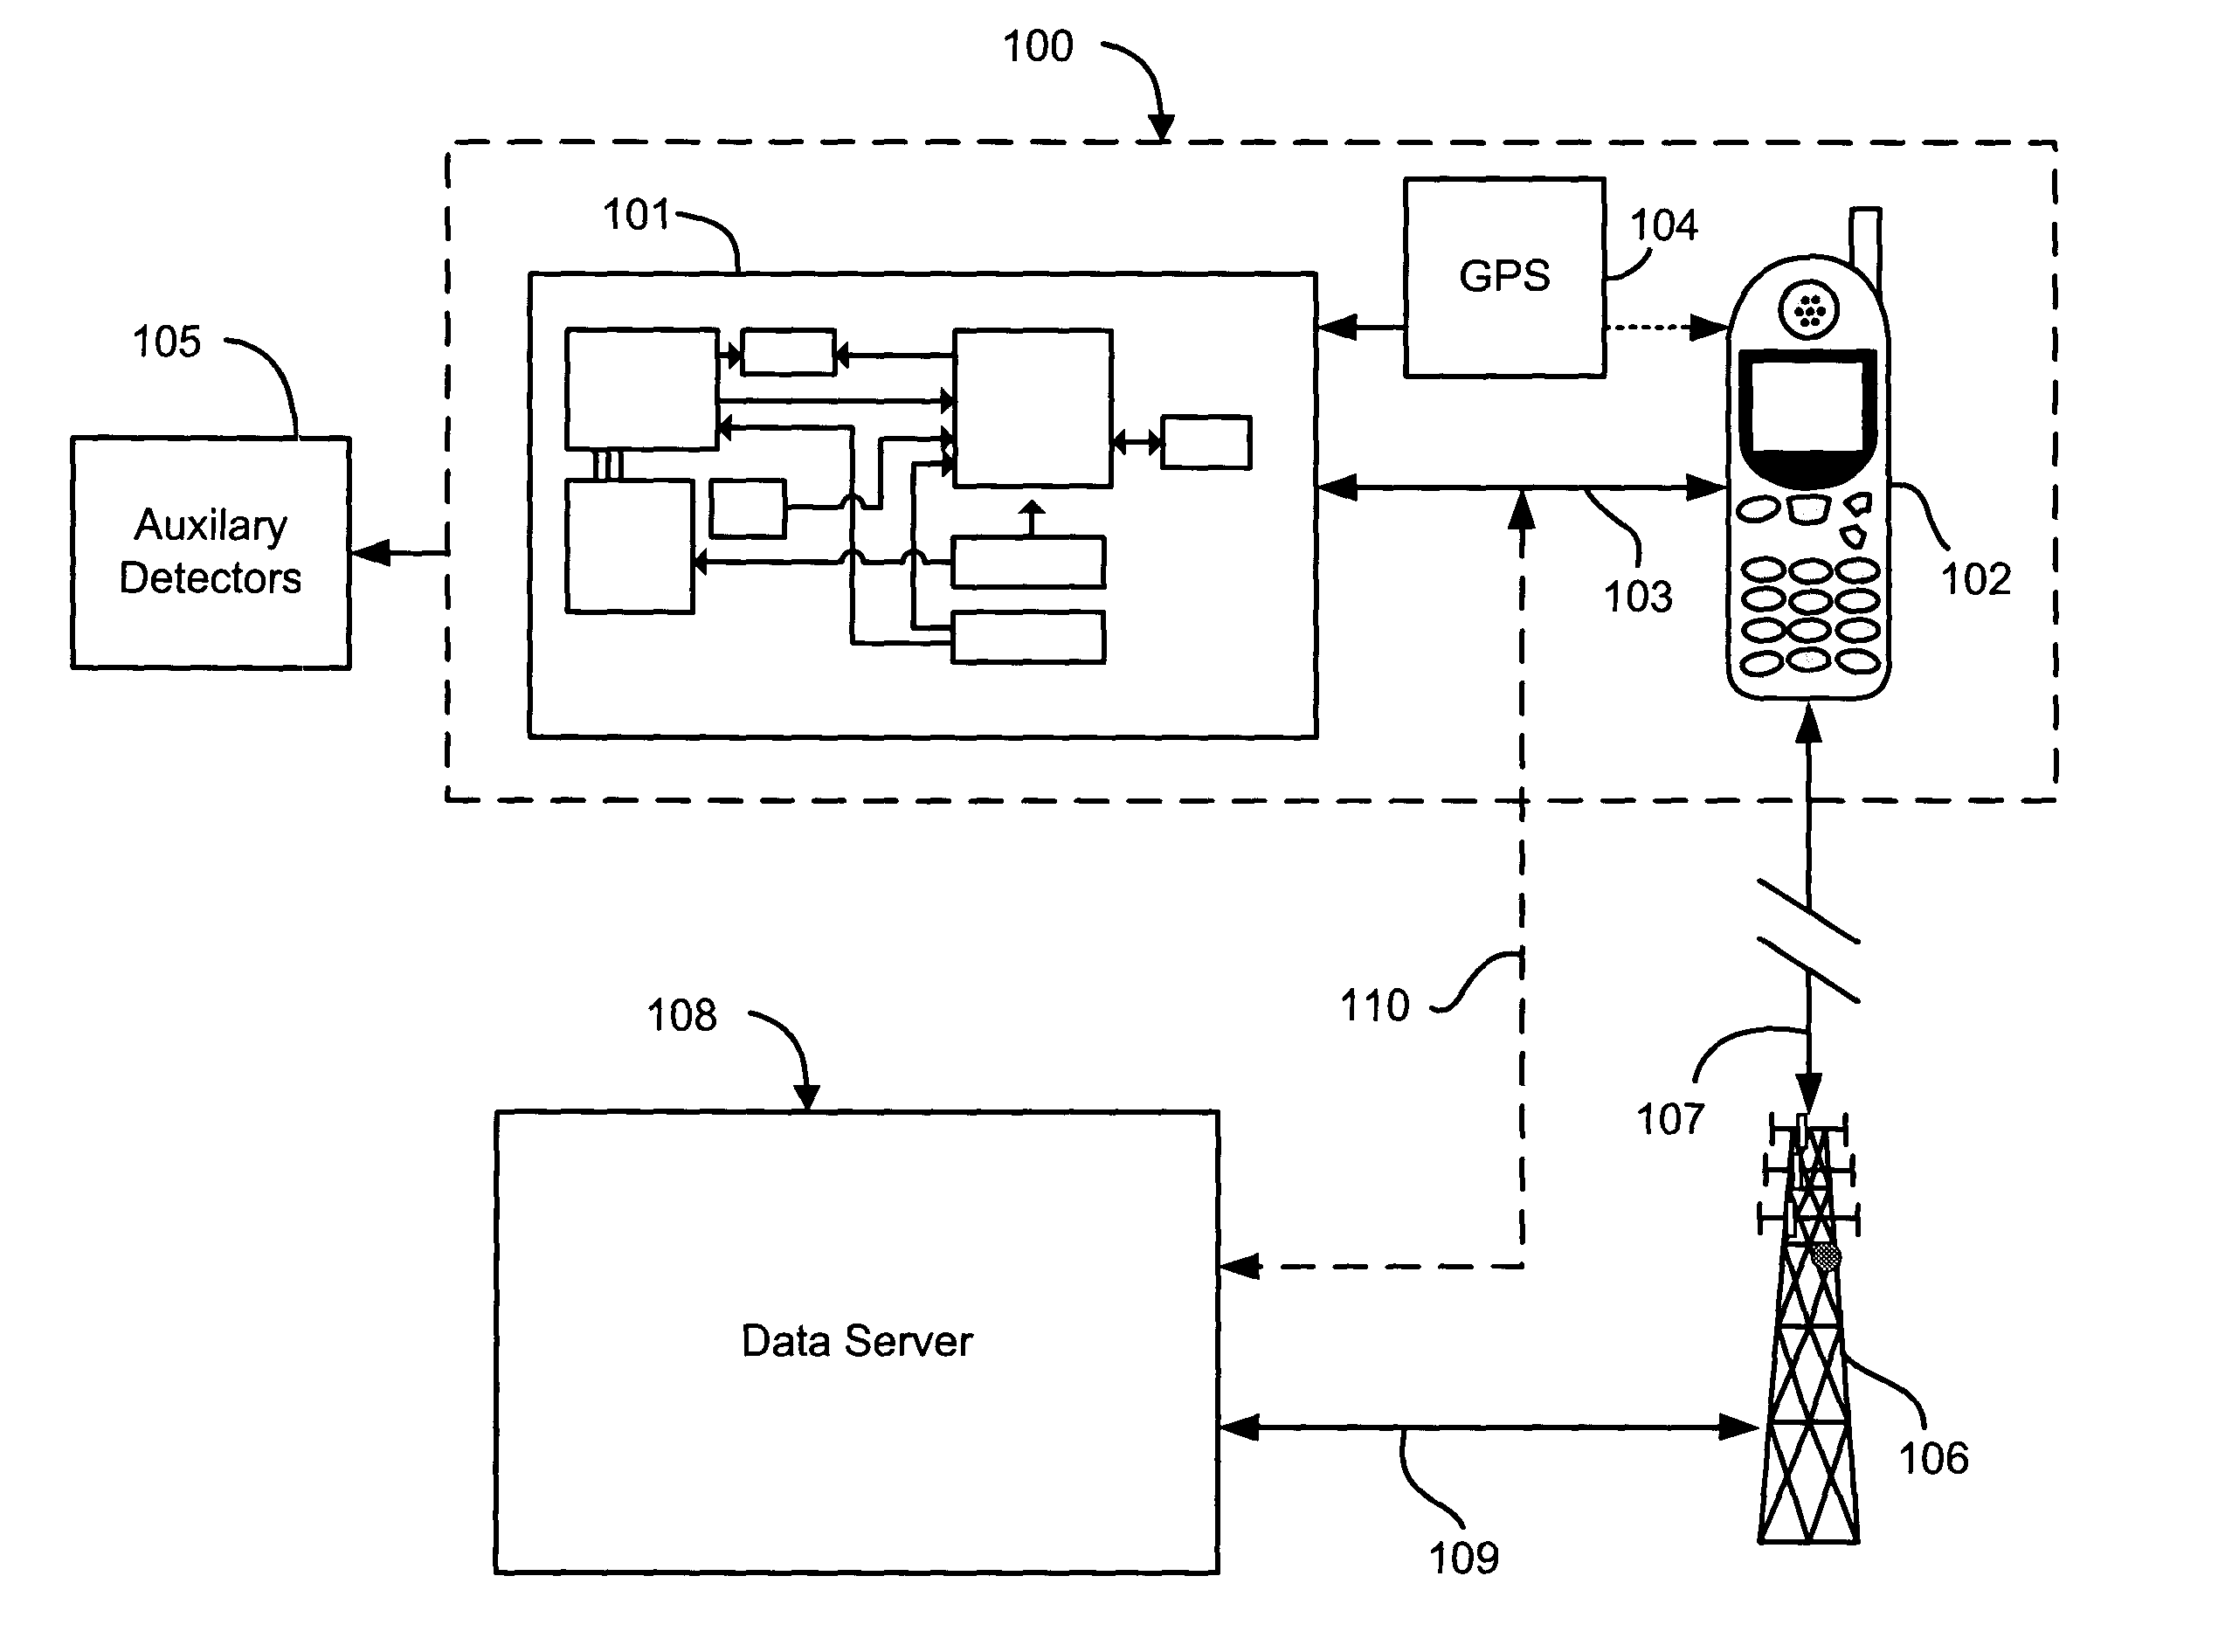 Cellular telephone-based radiation sensor and wide-area detection network